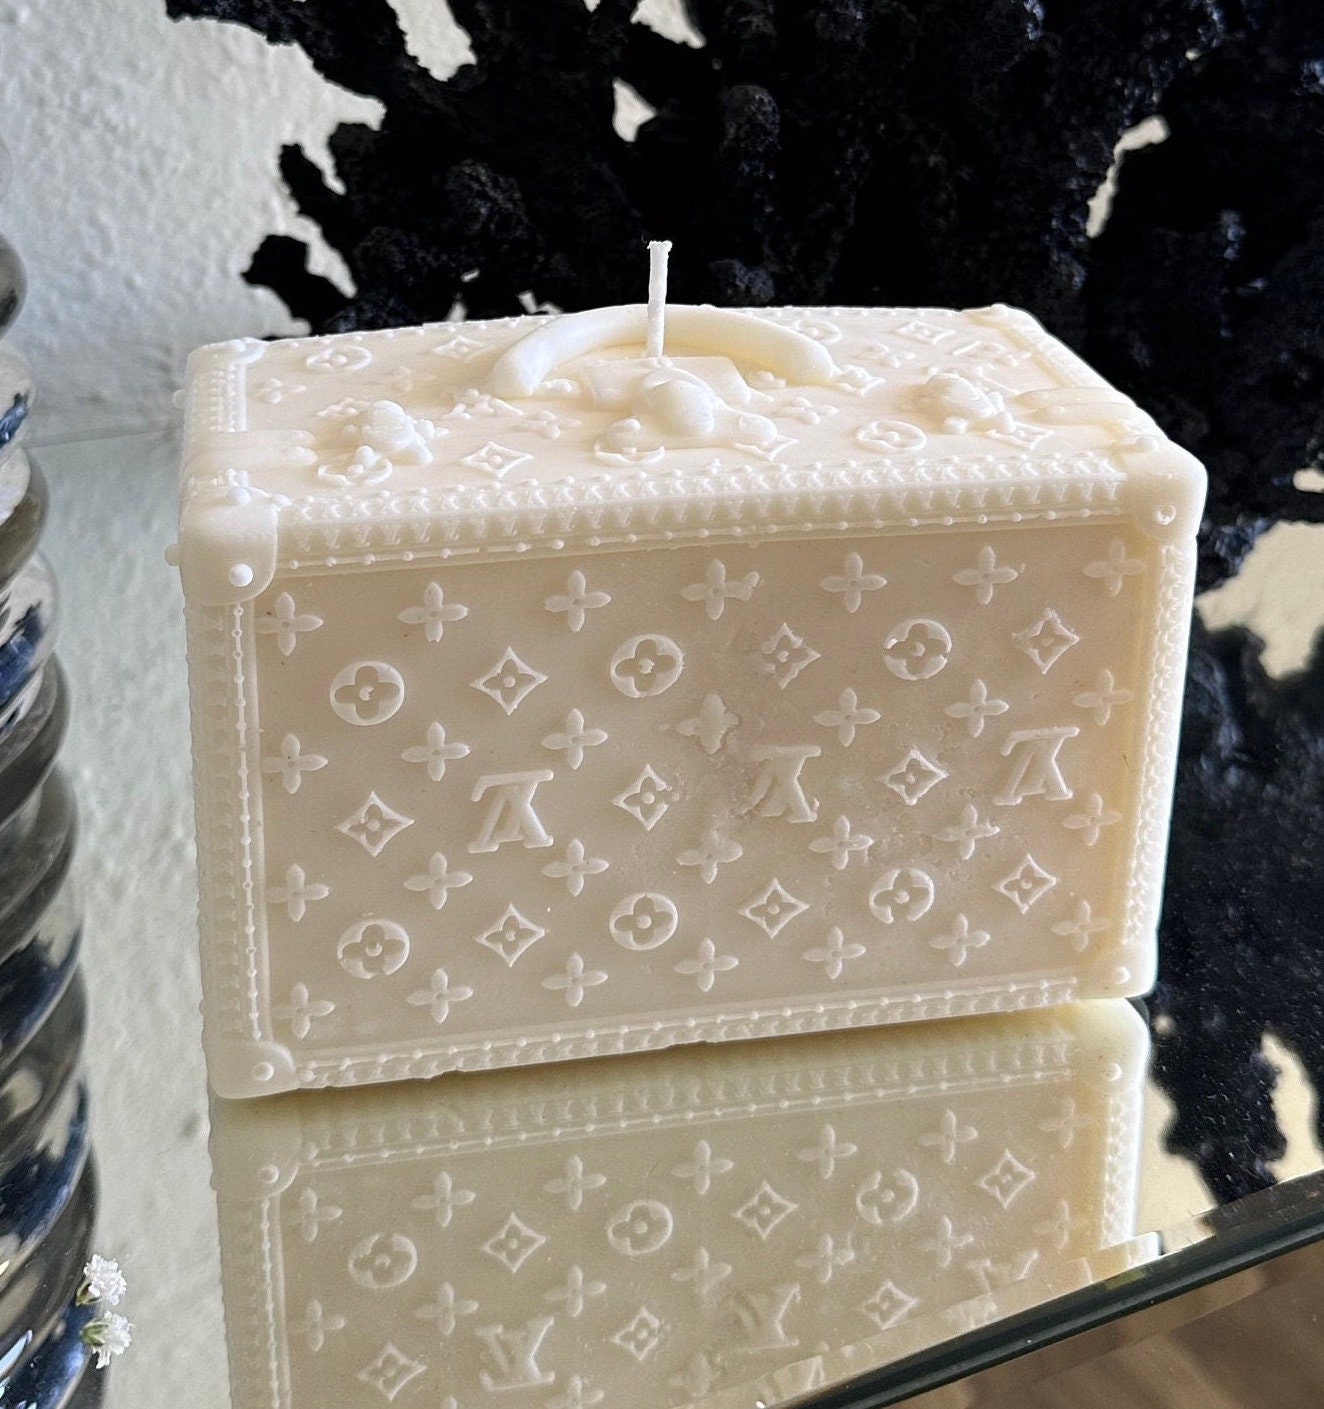 LV Inspired Bag Candle – Christen Your Room